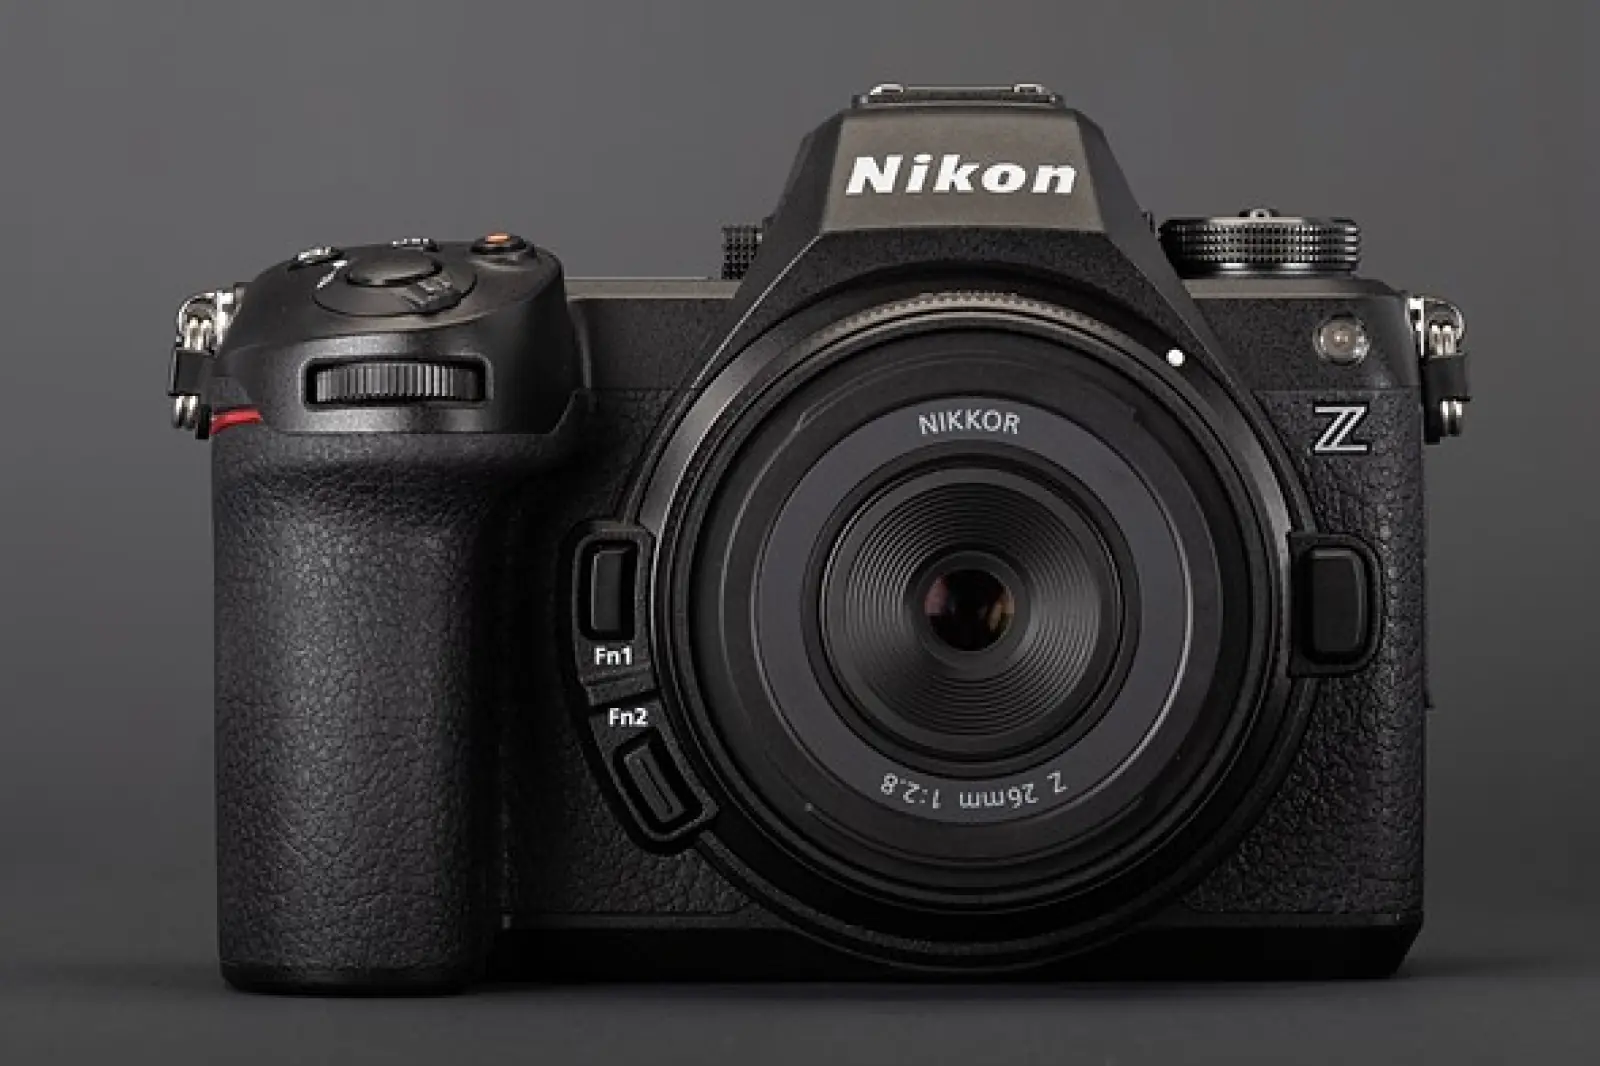 Nikon Z6III camera launched globally, these are the special features with 25.4MP sensor